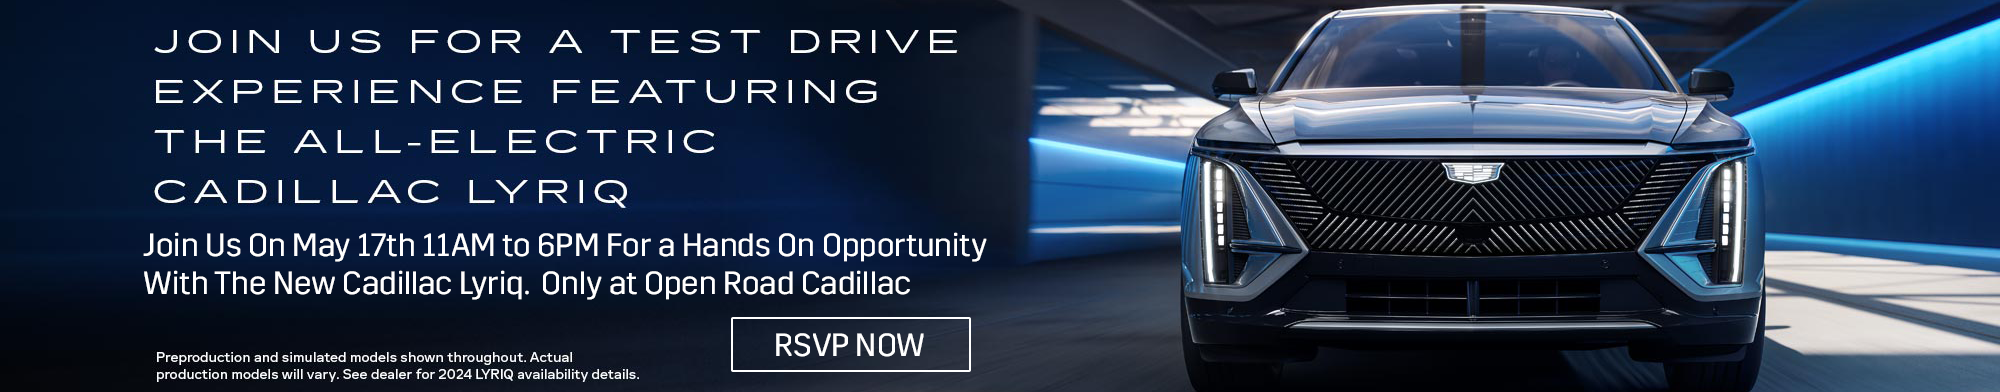 Take this opportunity to discover the electric cadillac lyriq only at Open Road Cadillac.